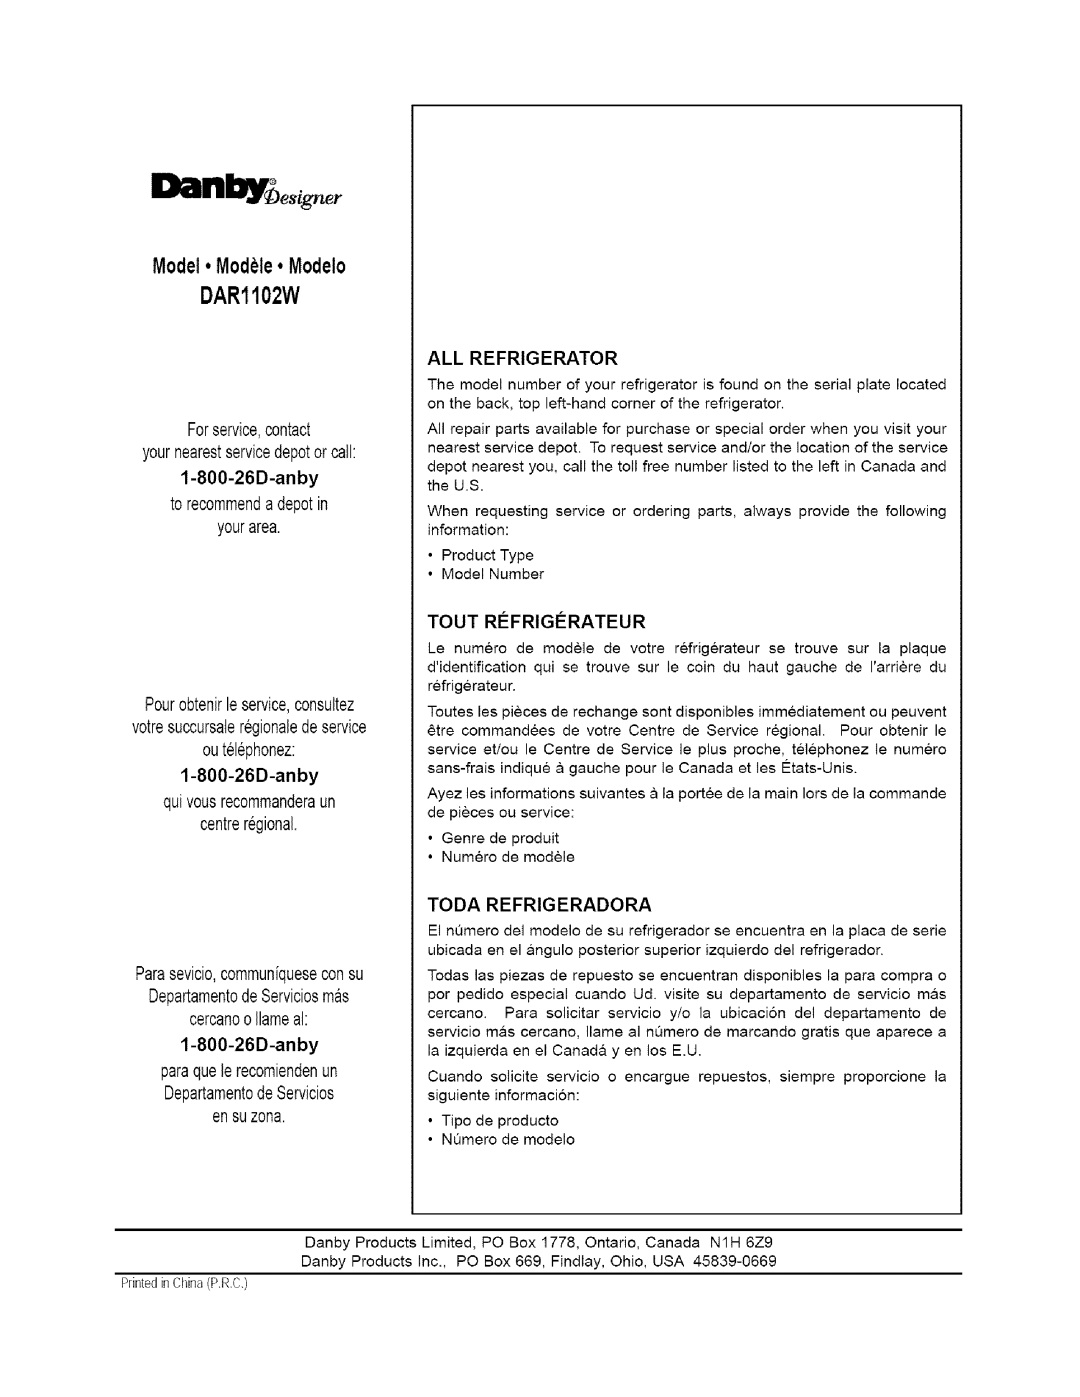 Danby DAR1102W manual Model Modèle Modelo, For service, contact, your nearest service depot or call, All Refrigerator 